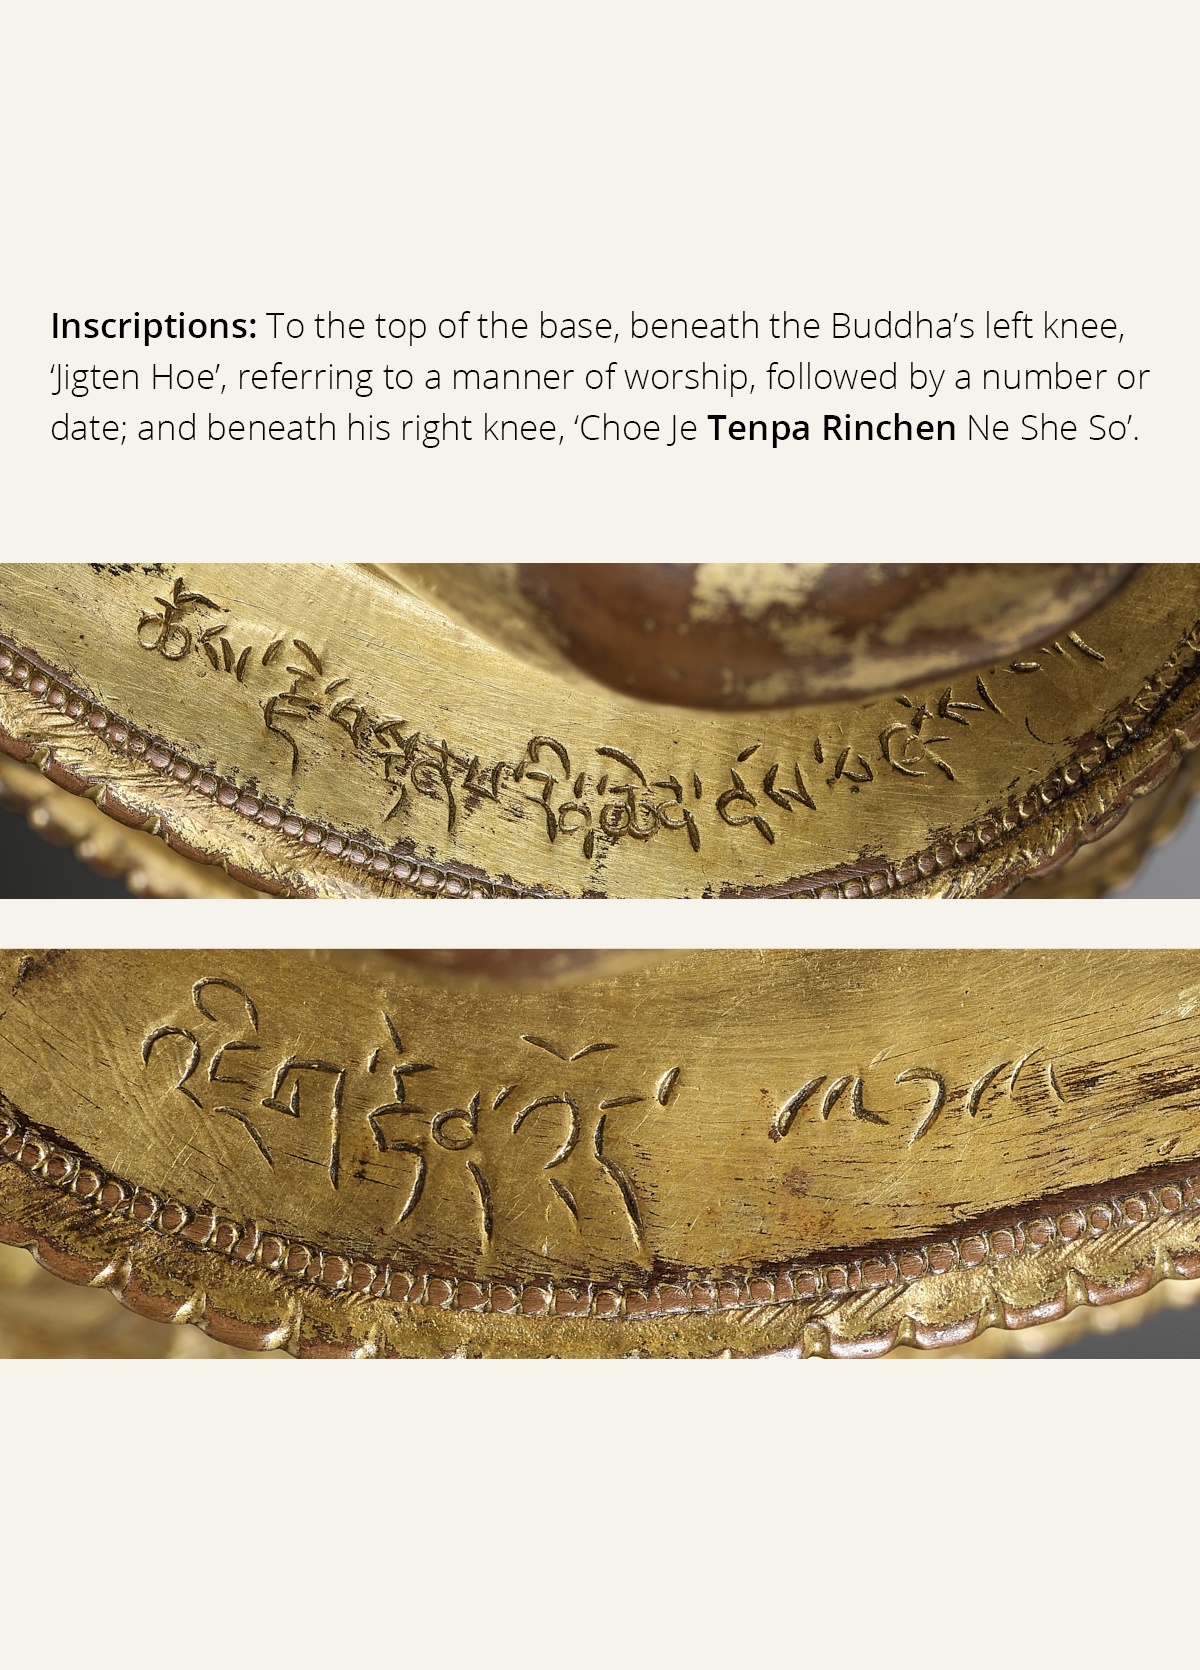 A GILT COPPER-ALLOY REPOUSSE FIGURE OF BUDDHA AMITABHA, WITH AN INSCRIPTION REFERRING TO THE SECOND - Image 3 of 16